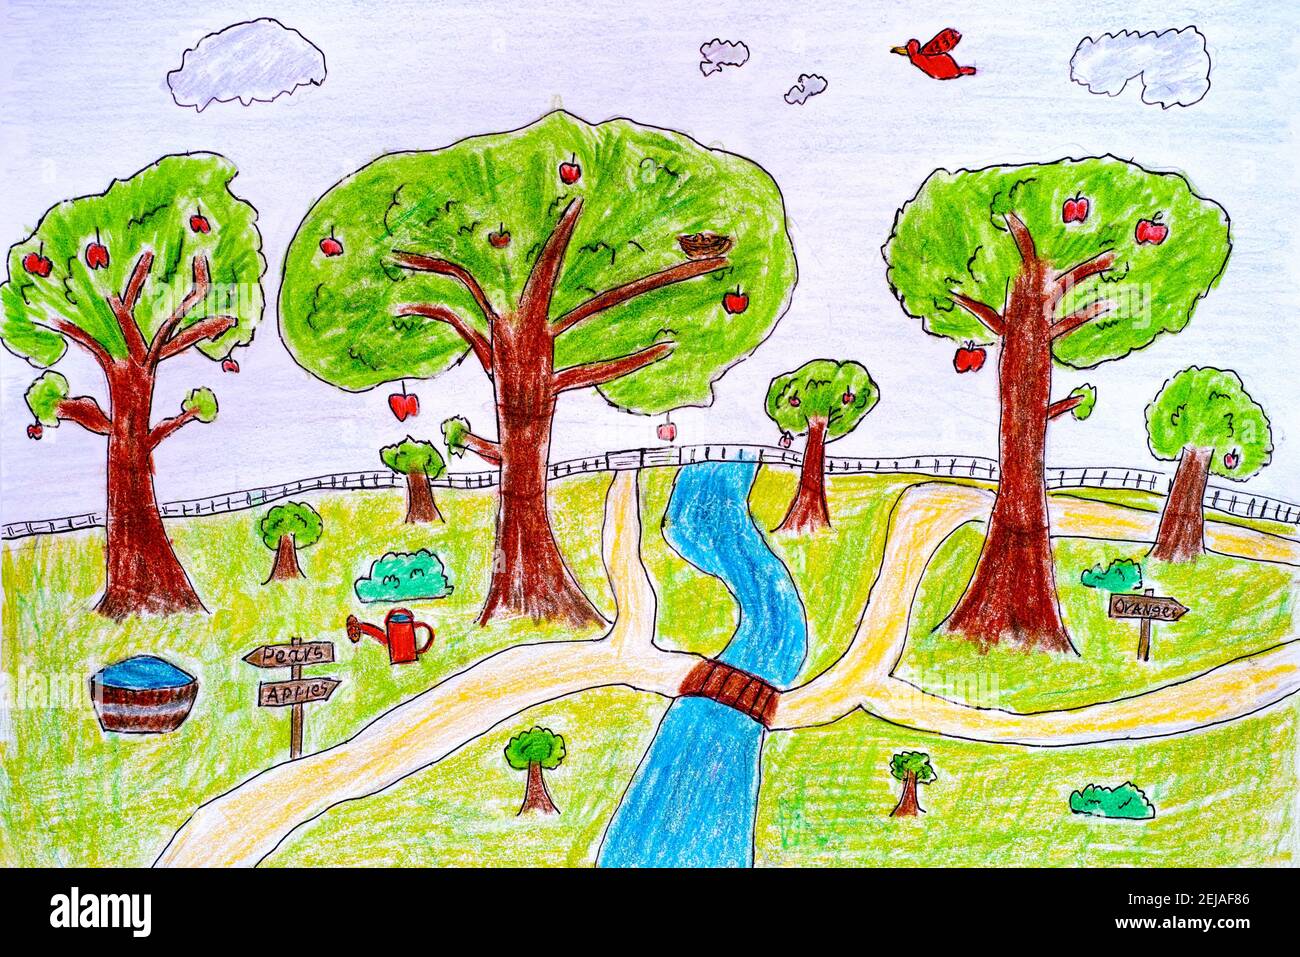 Child pencil hand drawing. Orchard with apple trees Stock Photo